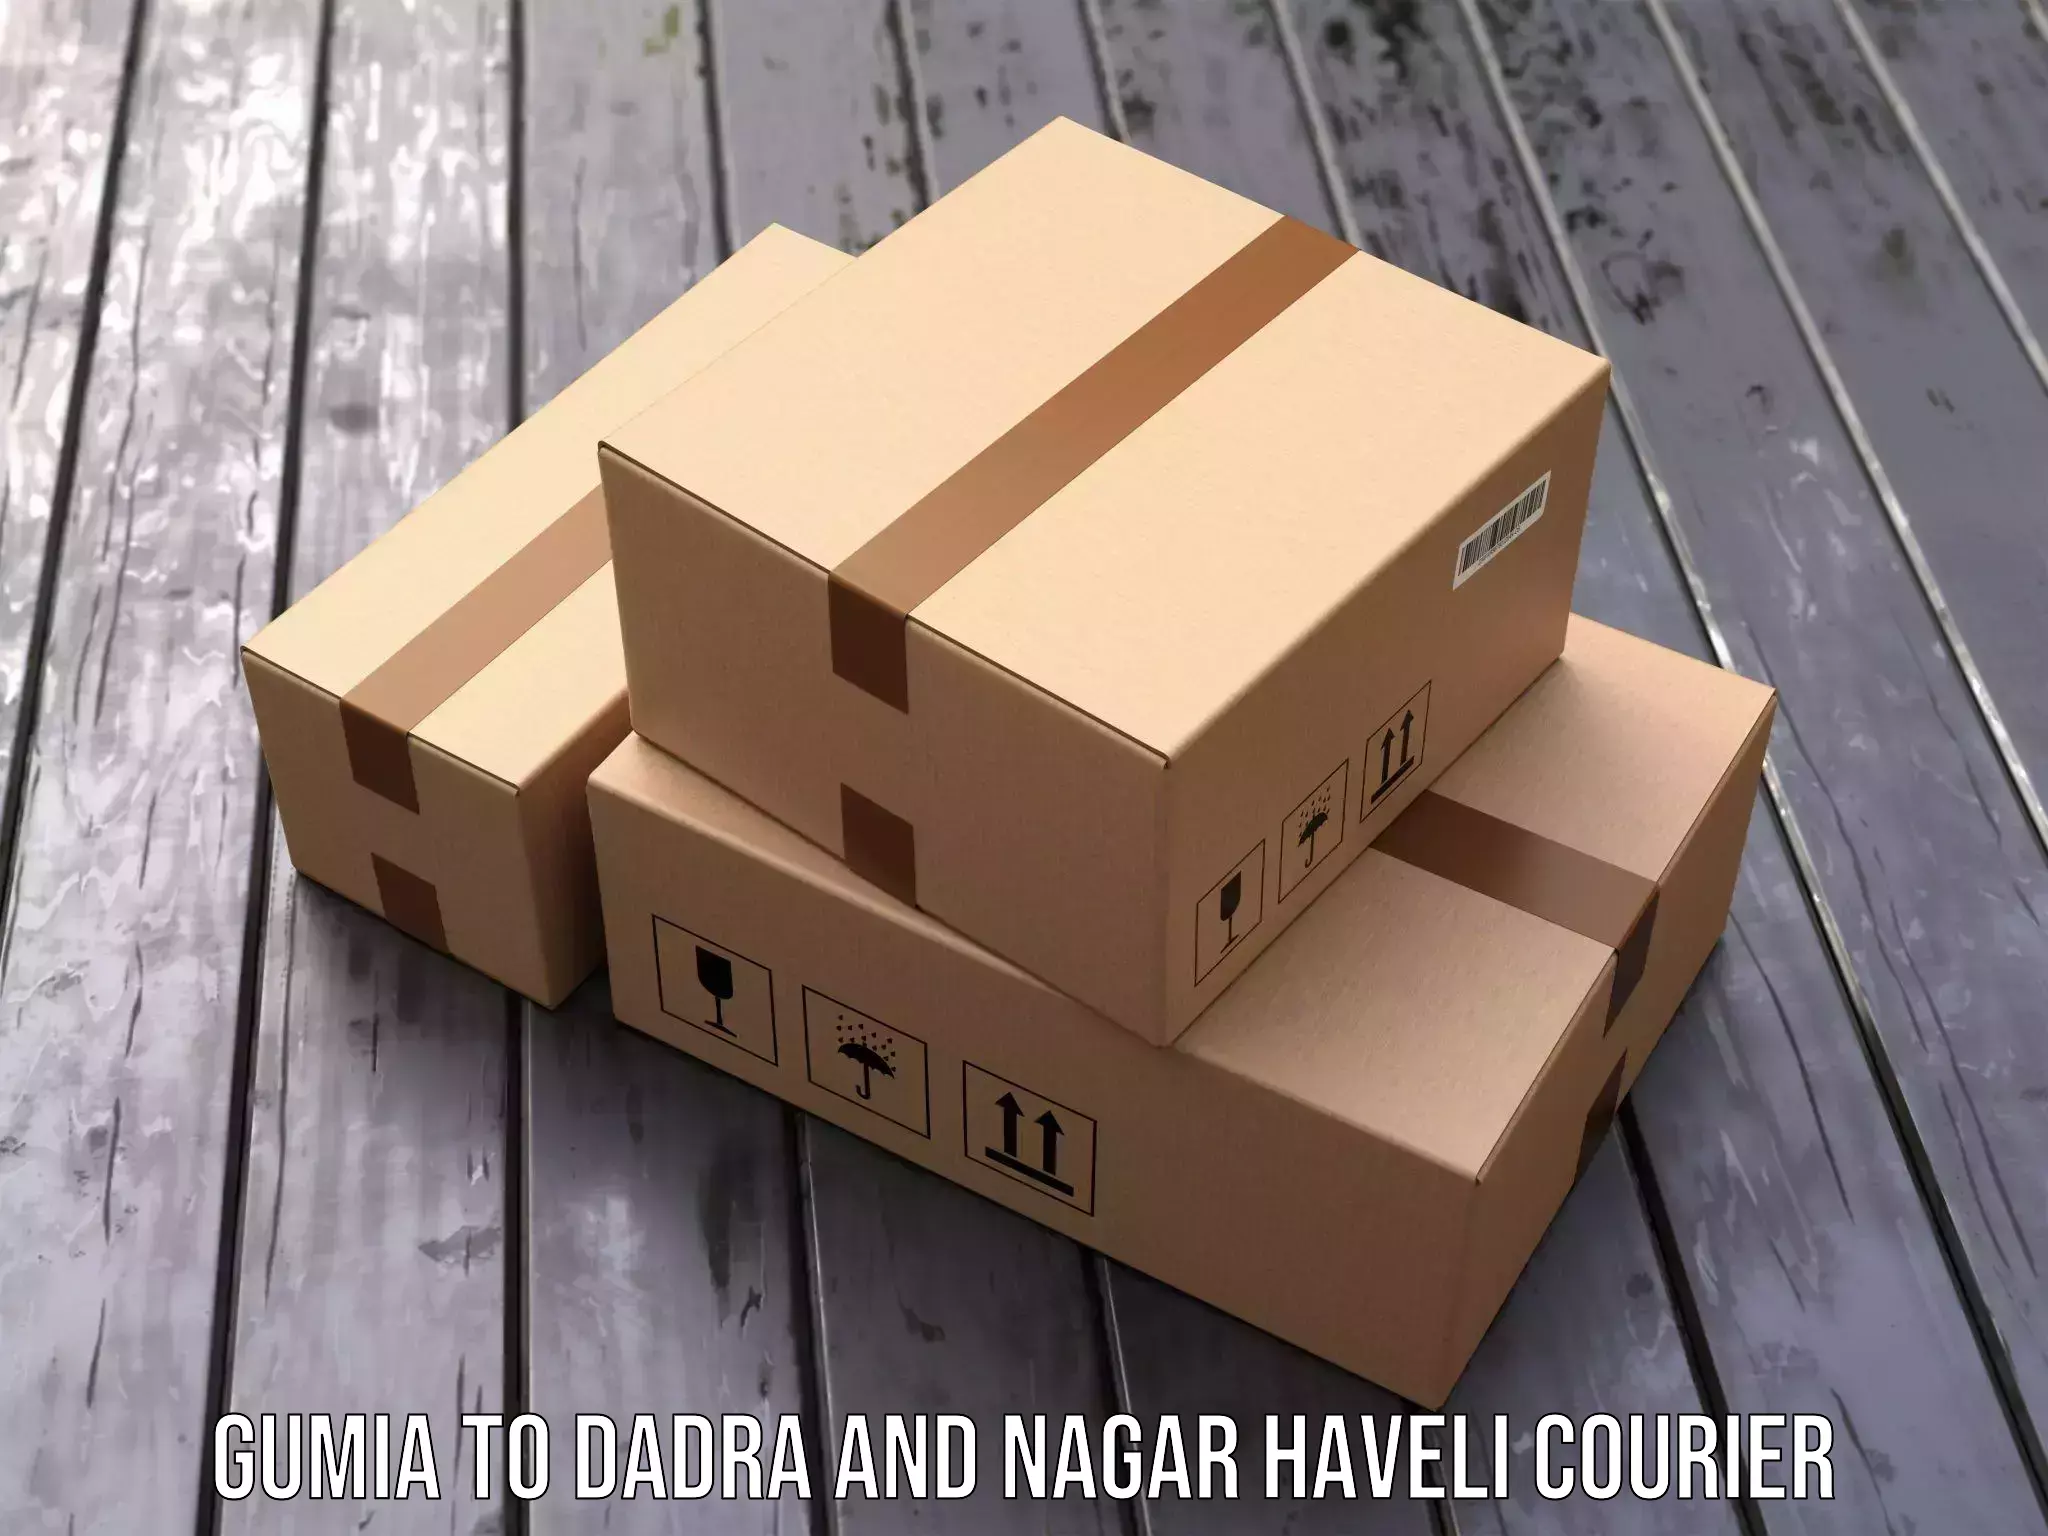 Sustainable shipping practices Gumia to Dadra and Nagar Haveli